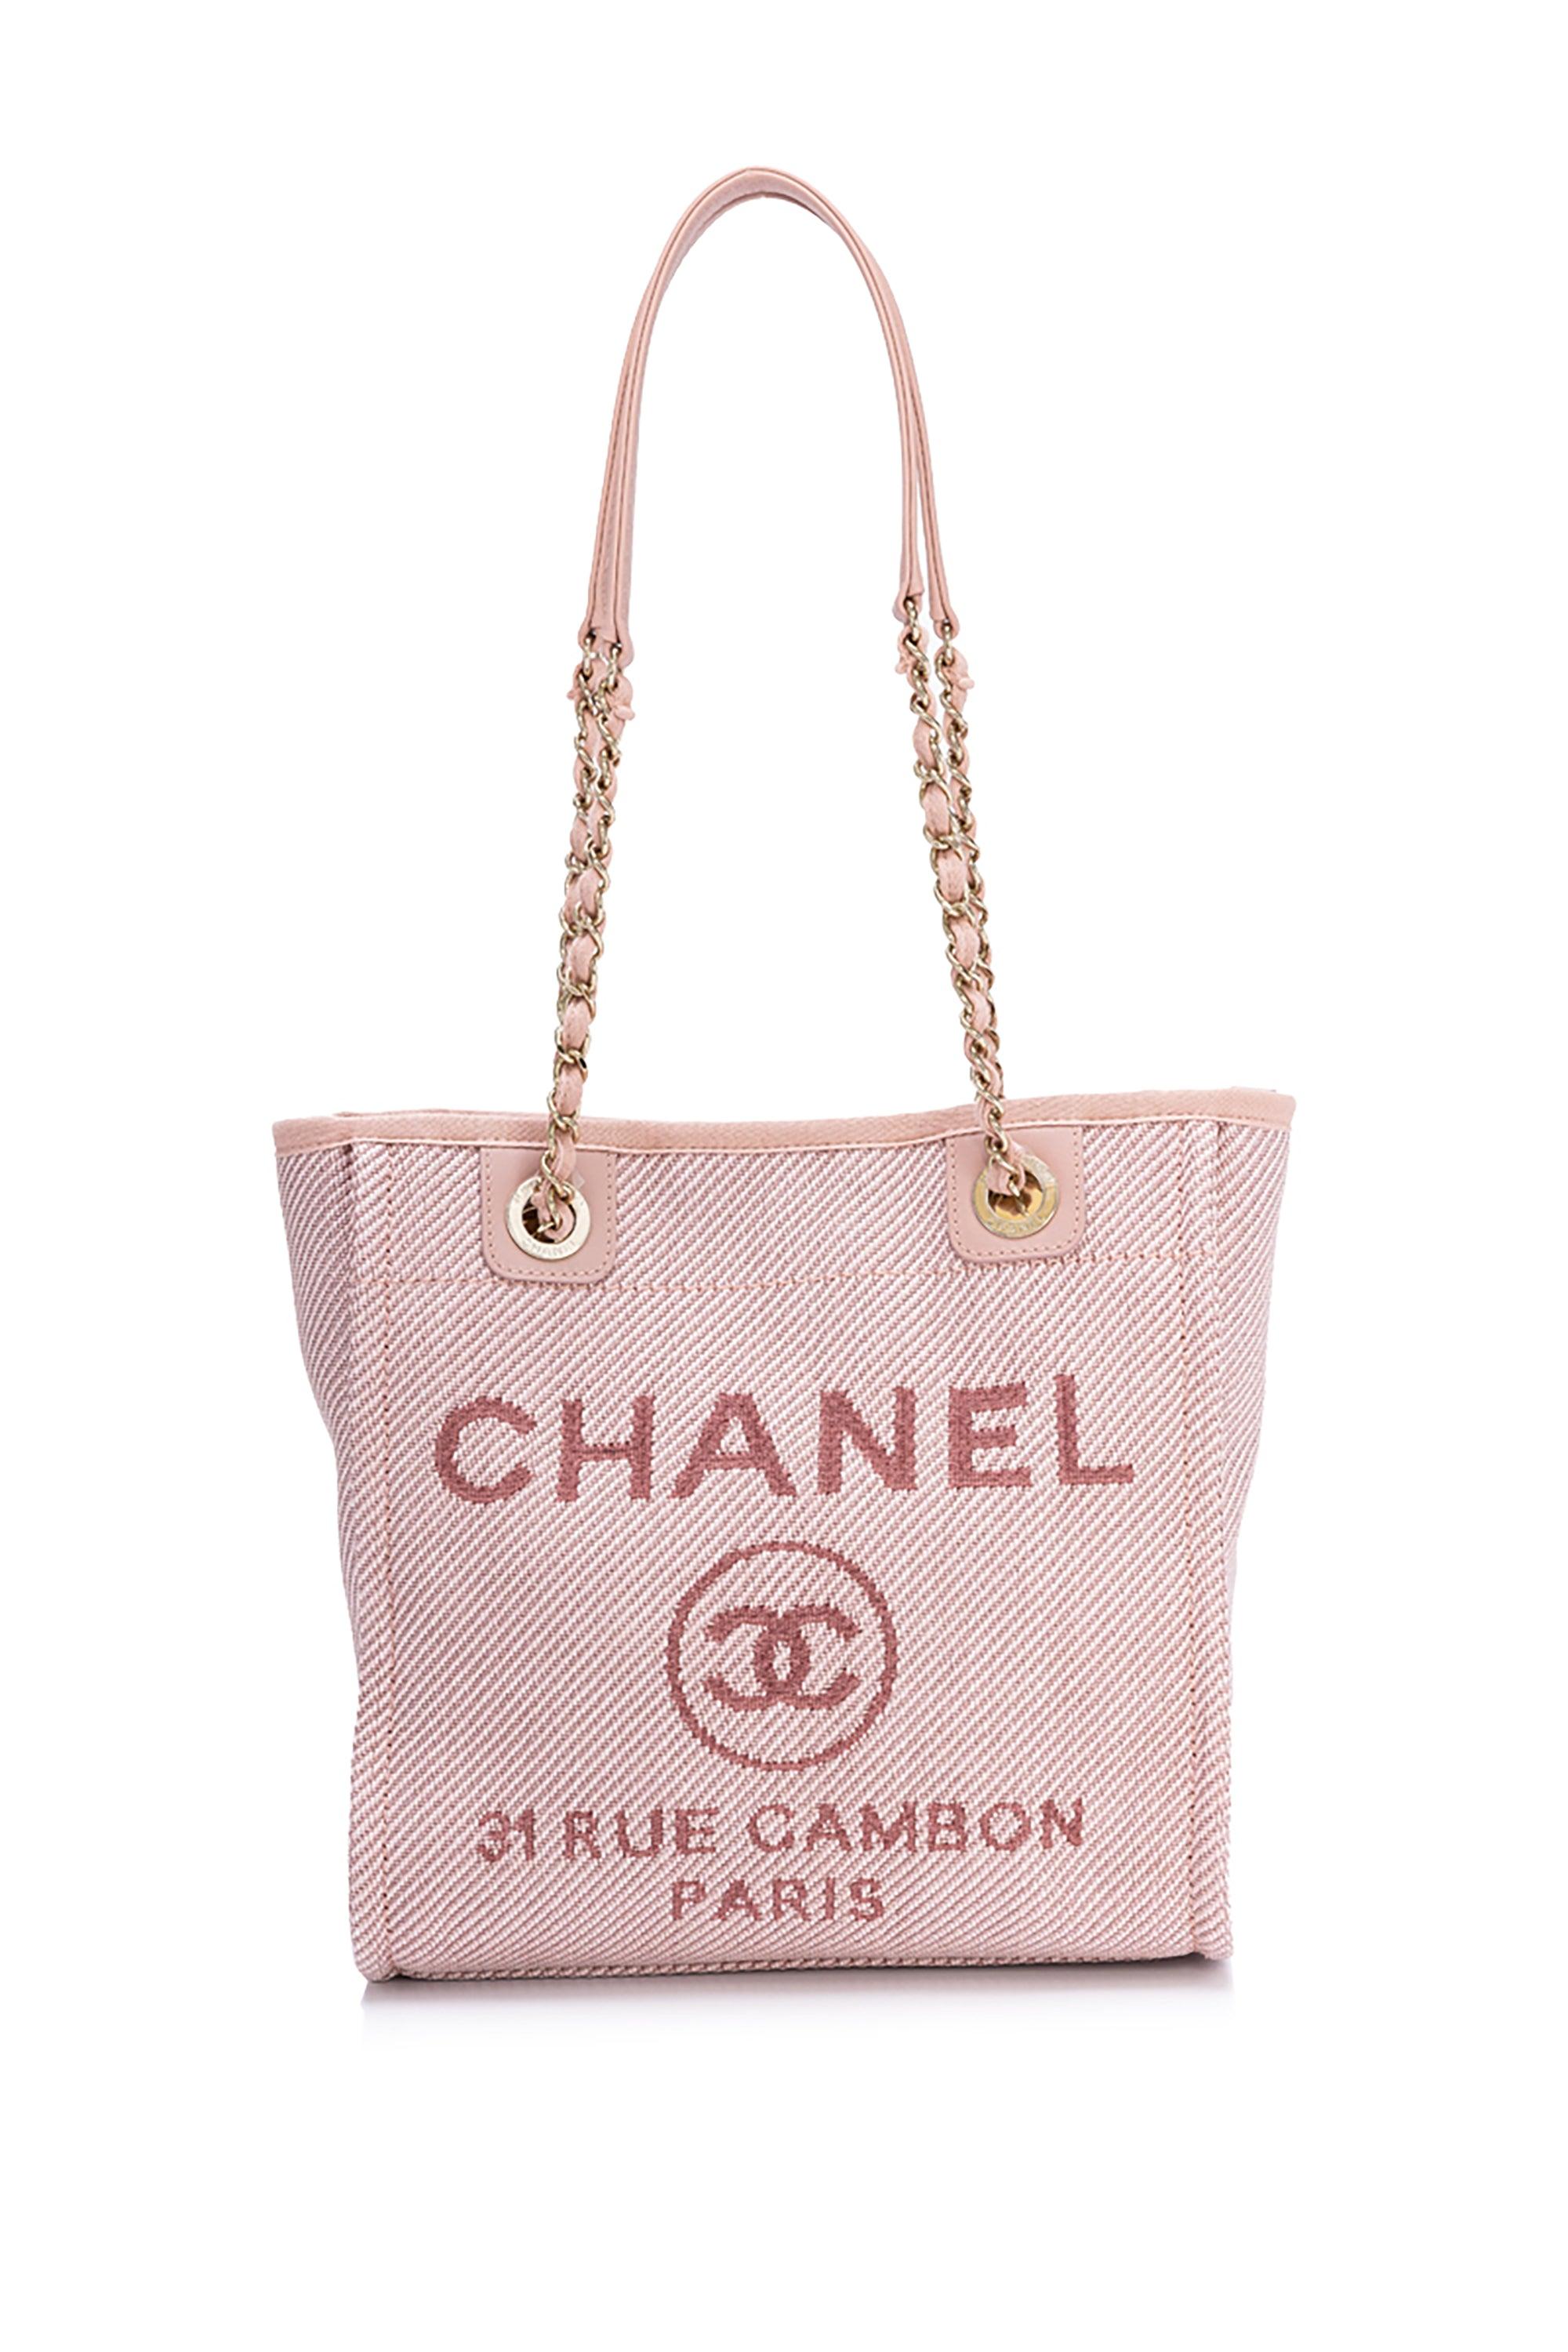 Pre-owned Chanel Deauville Pink